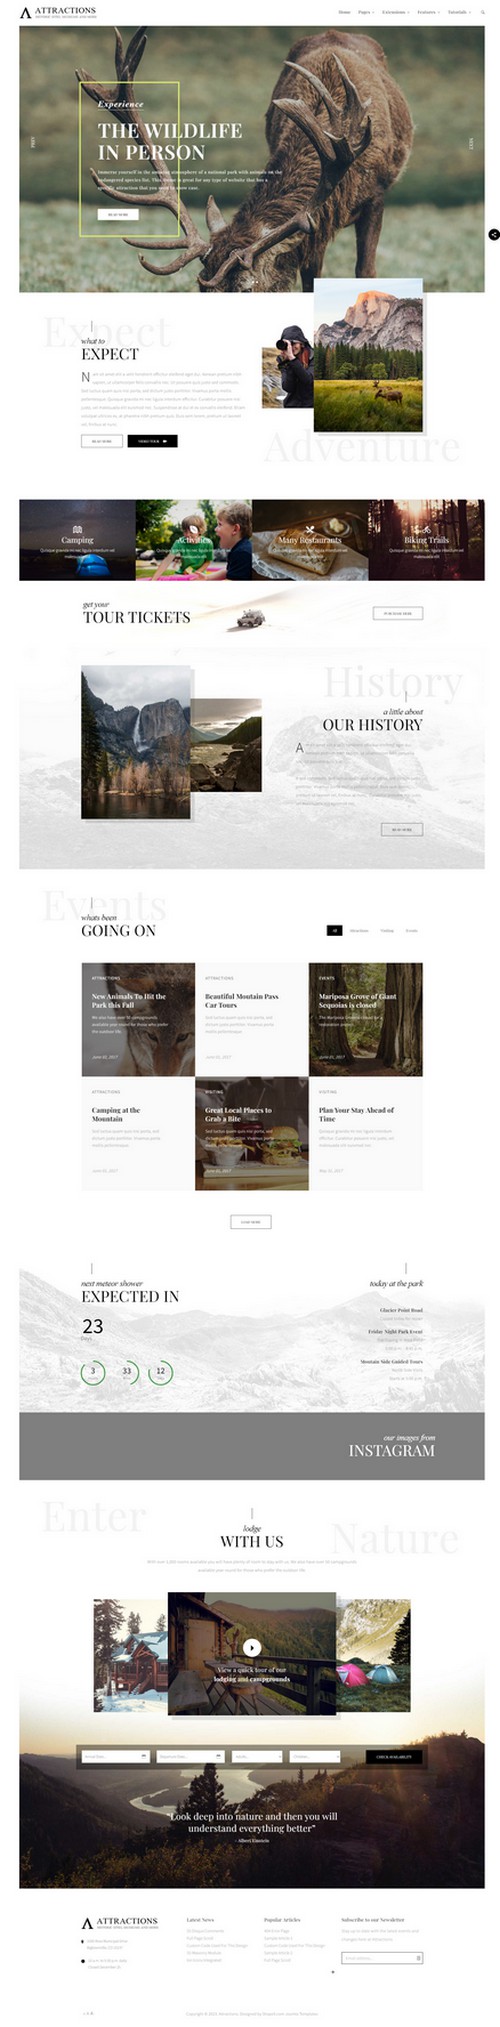 Attractions - Attraction Parks, Historical sites, Museums Joomla 4 Template